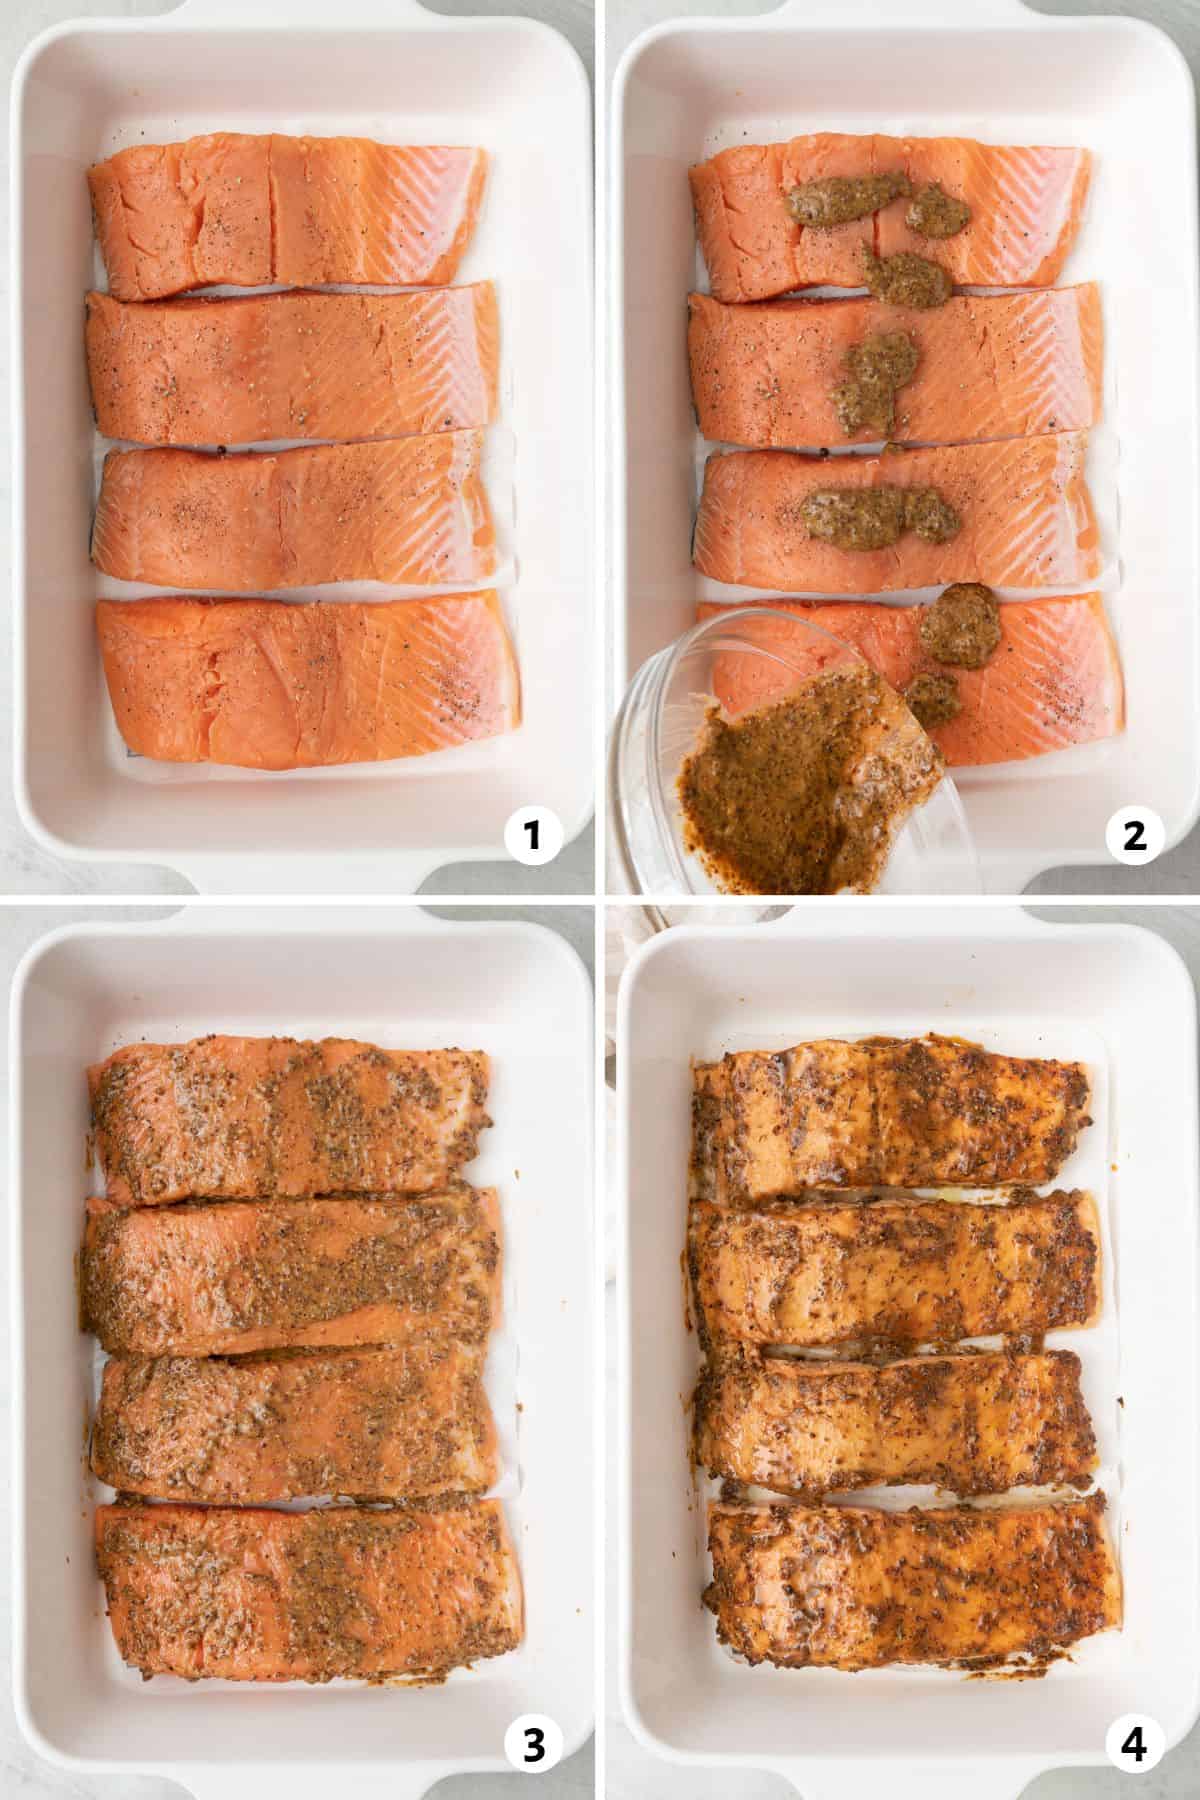 4 image collage making recipe in a rectangle baking dish: 1- 4 salmon fillets in dish, 2- pouring seasoning mixture over fish, 3- fish after being fully coated in mixture, 4- salmon after baking.